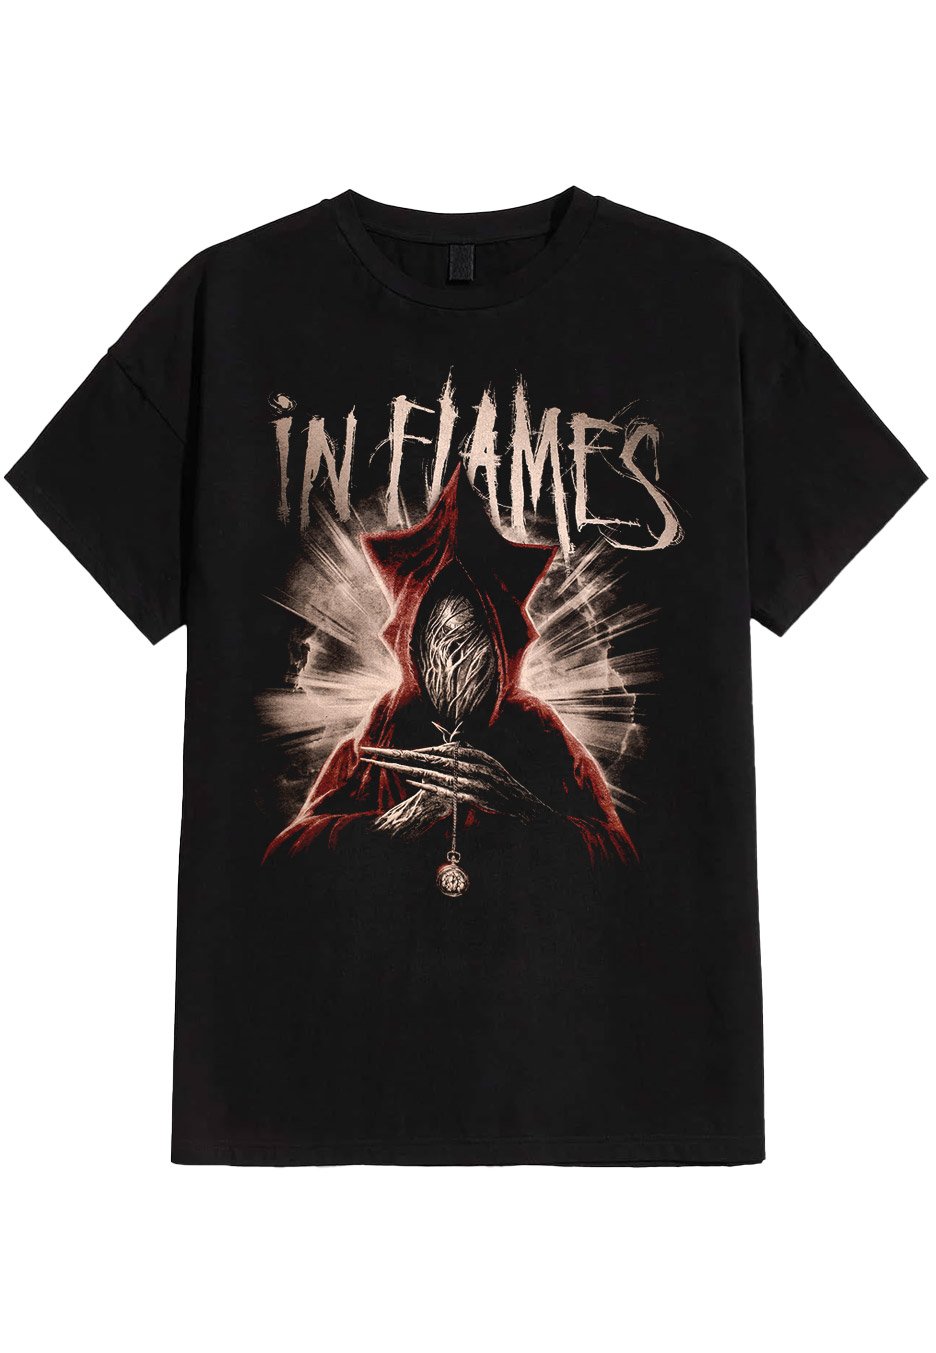 In Flames - At The End - T-Shirt